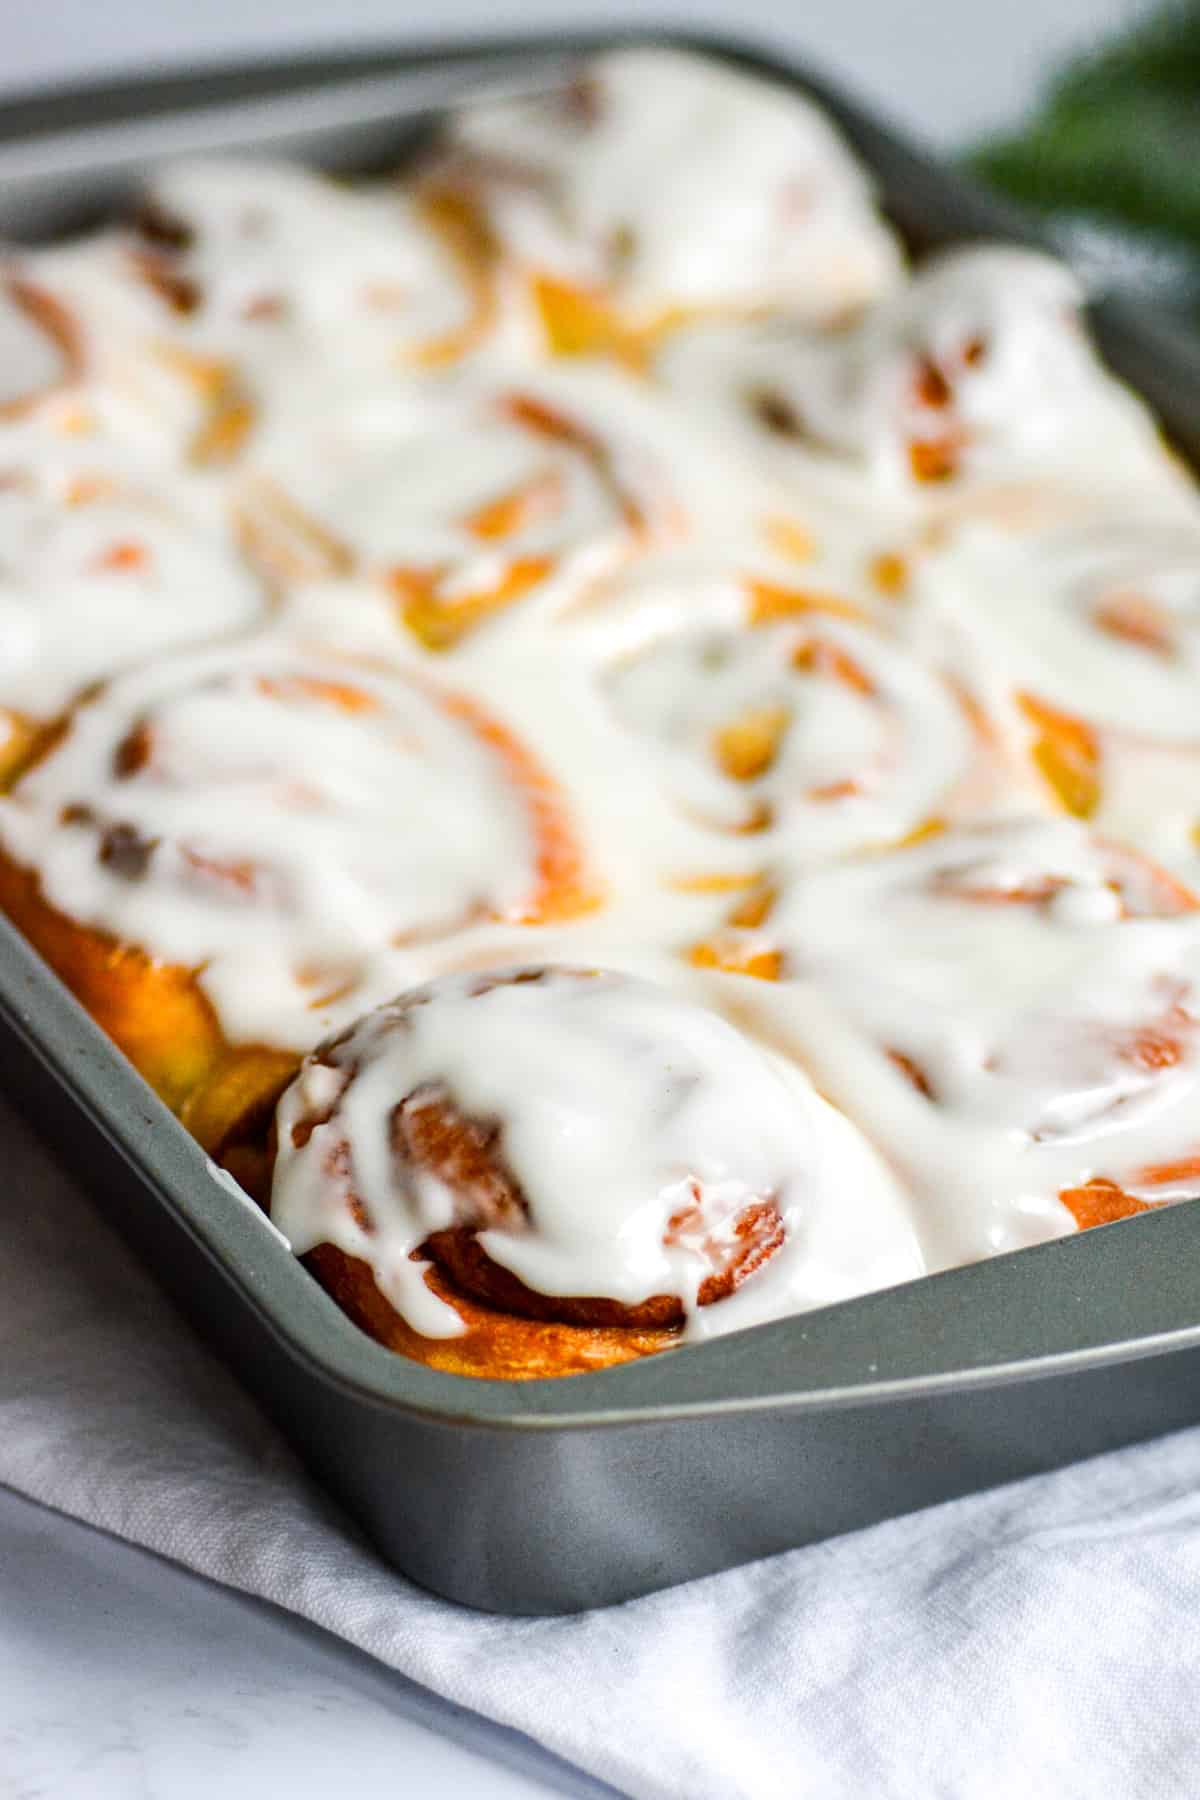 Vegan Cinnamon Rolls frosted with cream cheese frosting in a 9 by 13 pan.